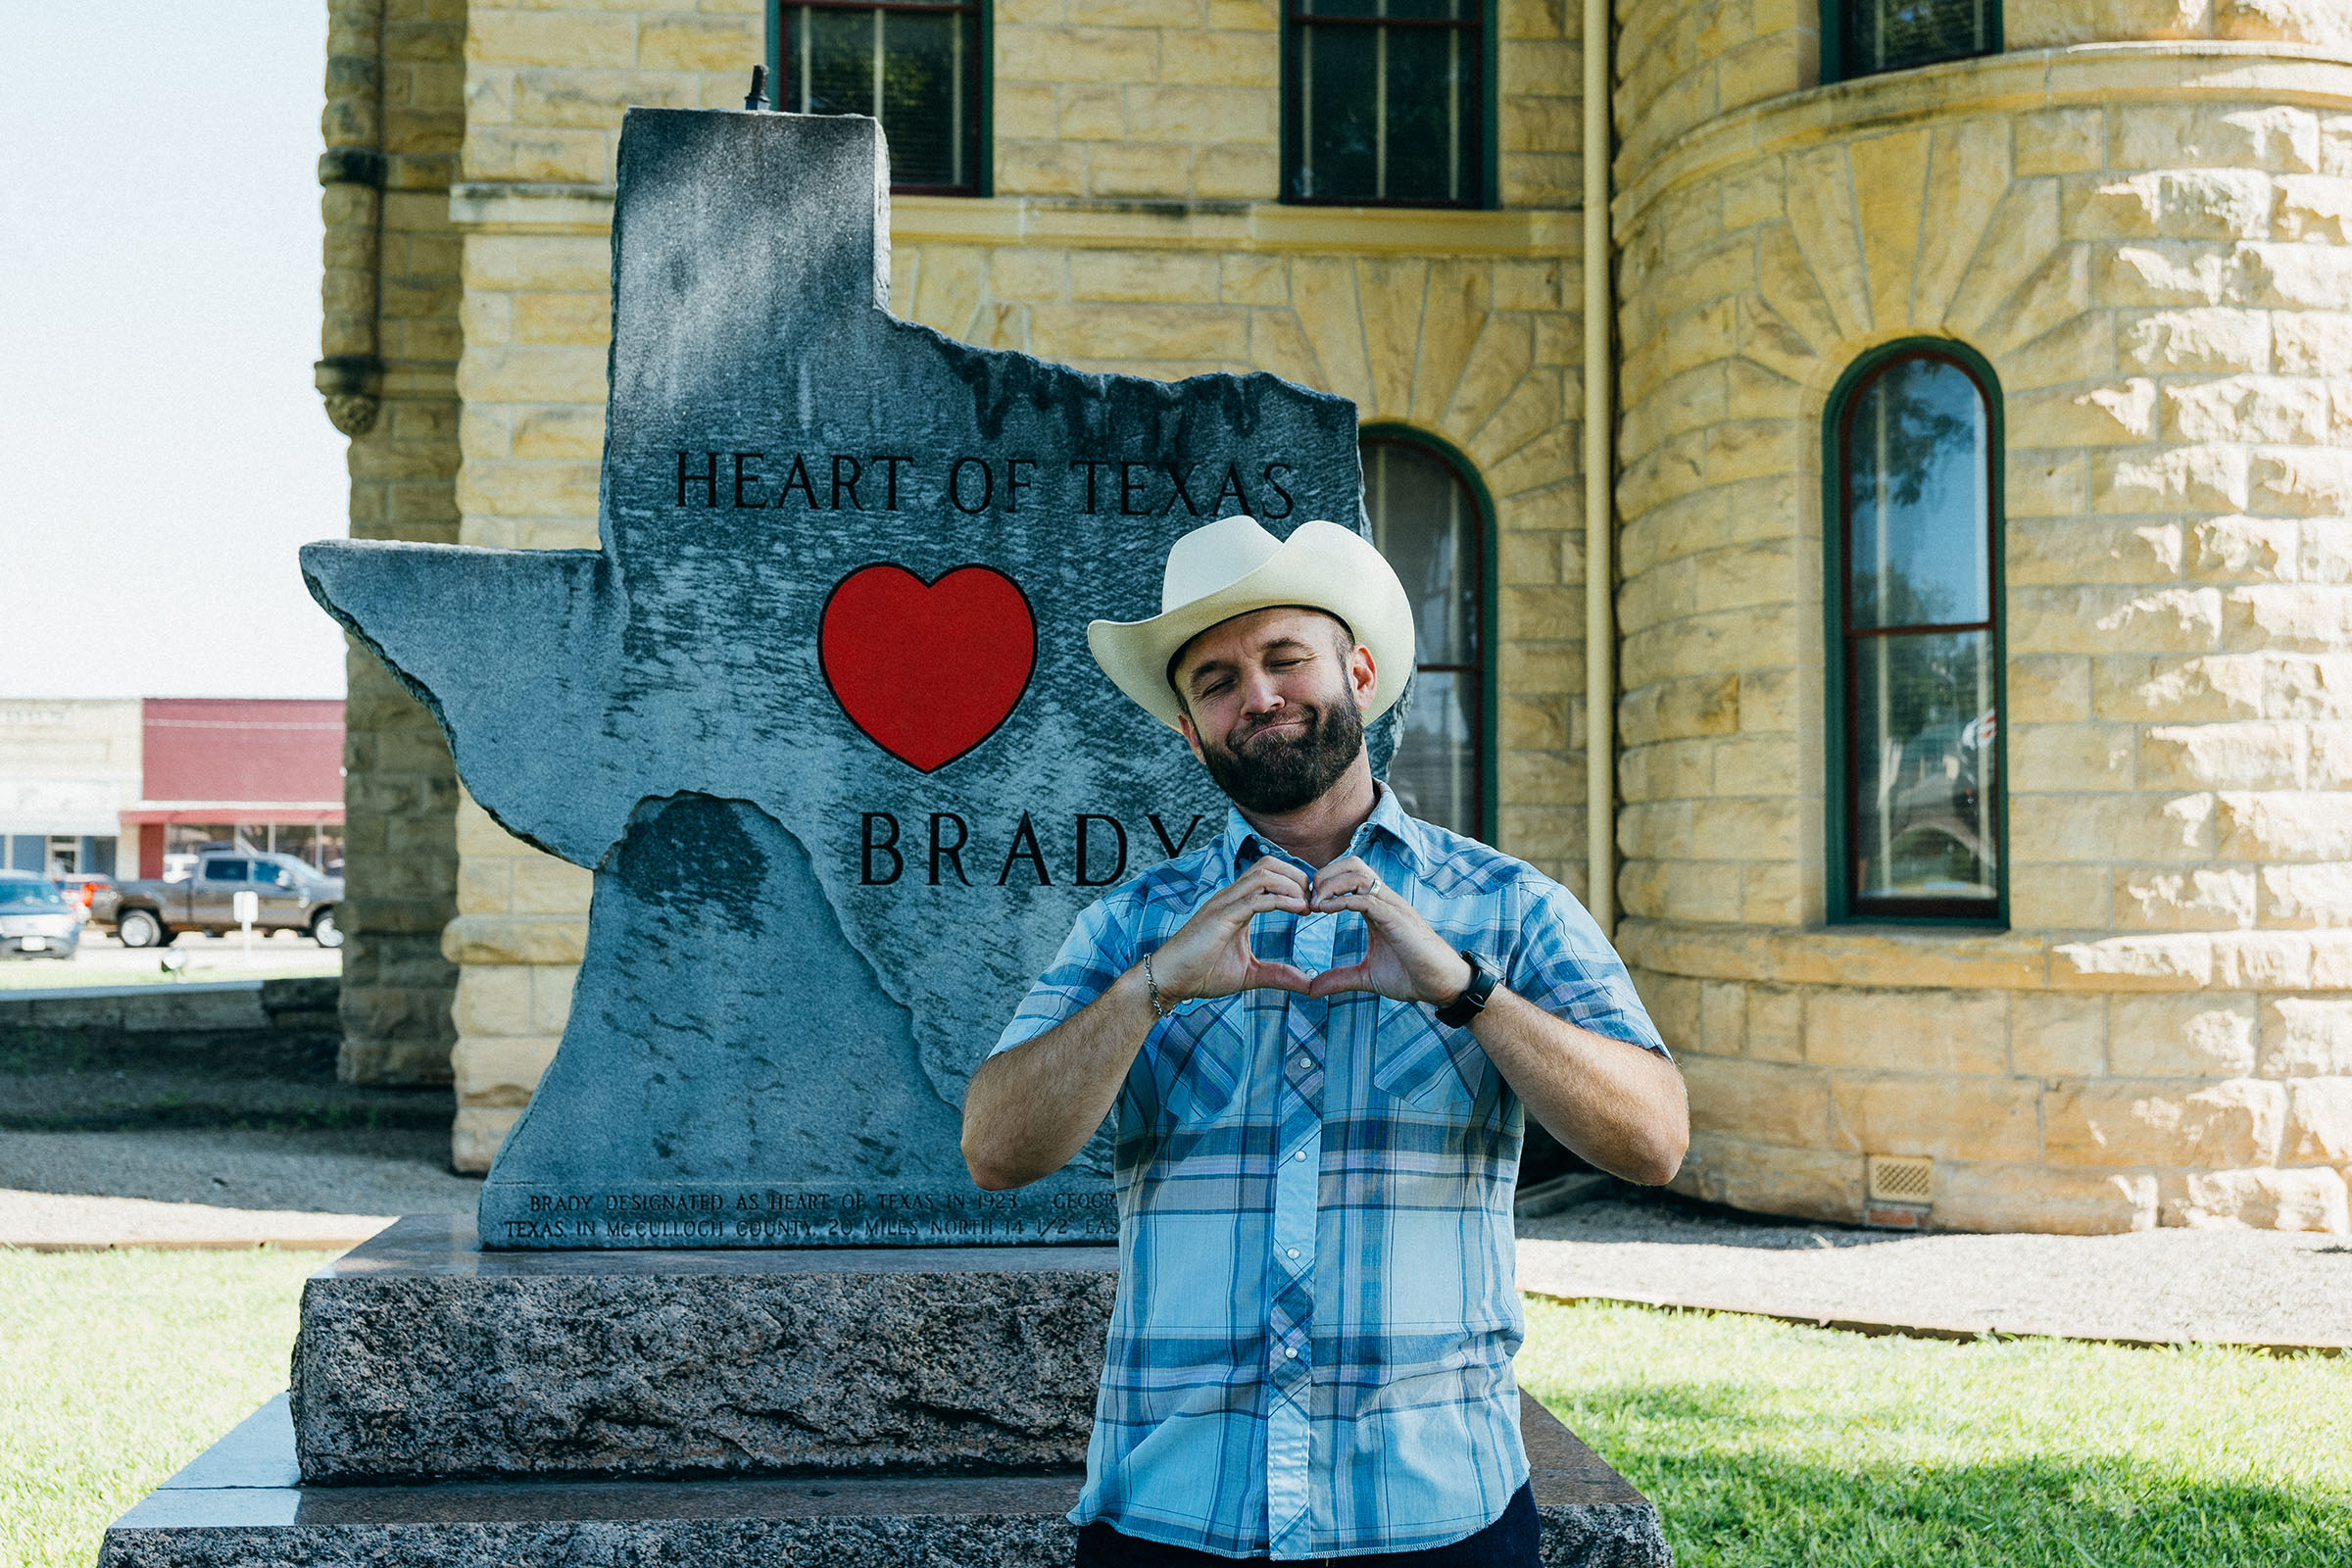 Chet Garner stands with his hands in the shape of a heart in front of a Texas-shaped sculpture